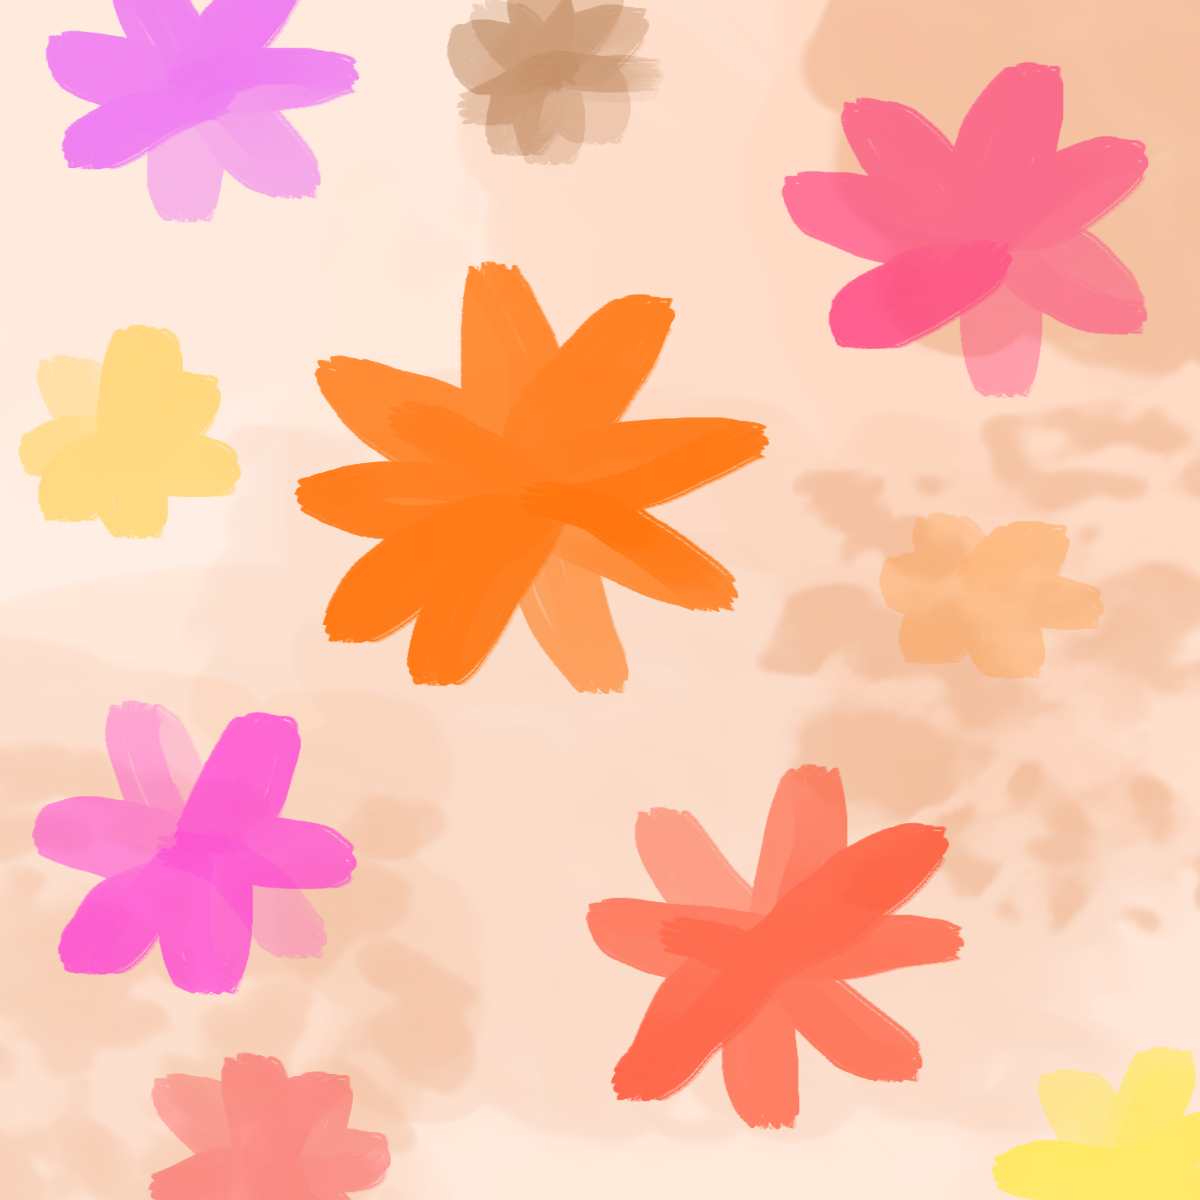 A drawn picture of variously colored flowers.